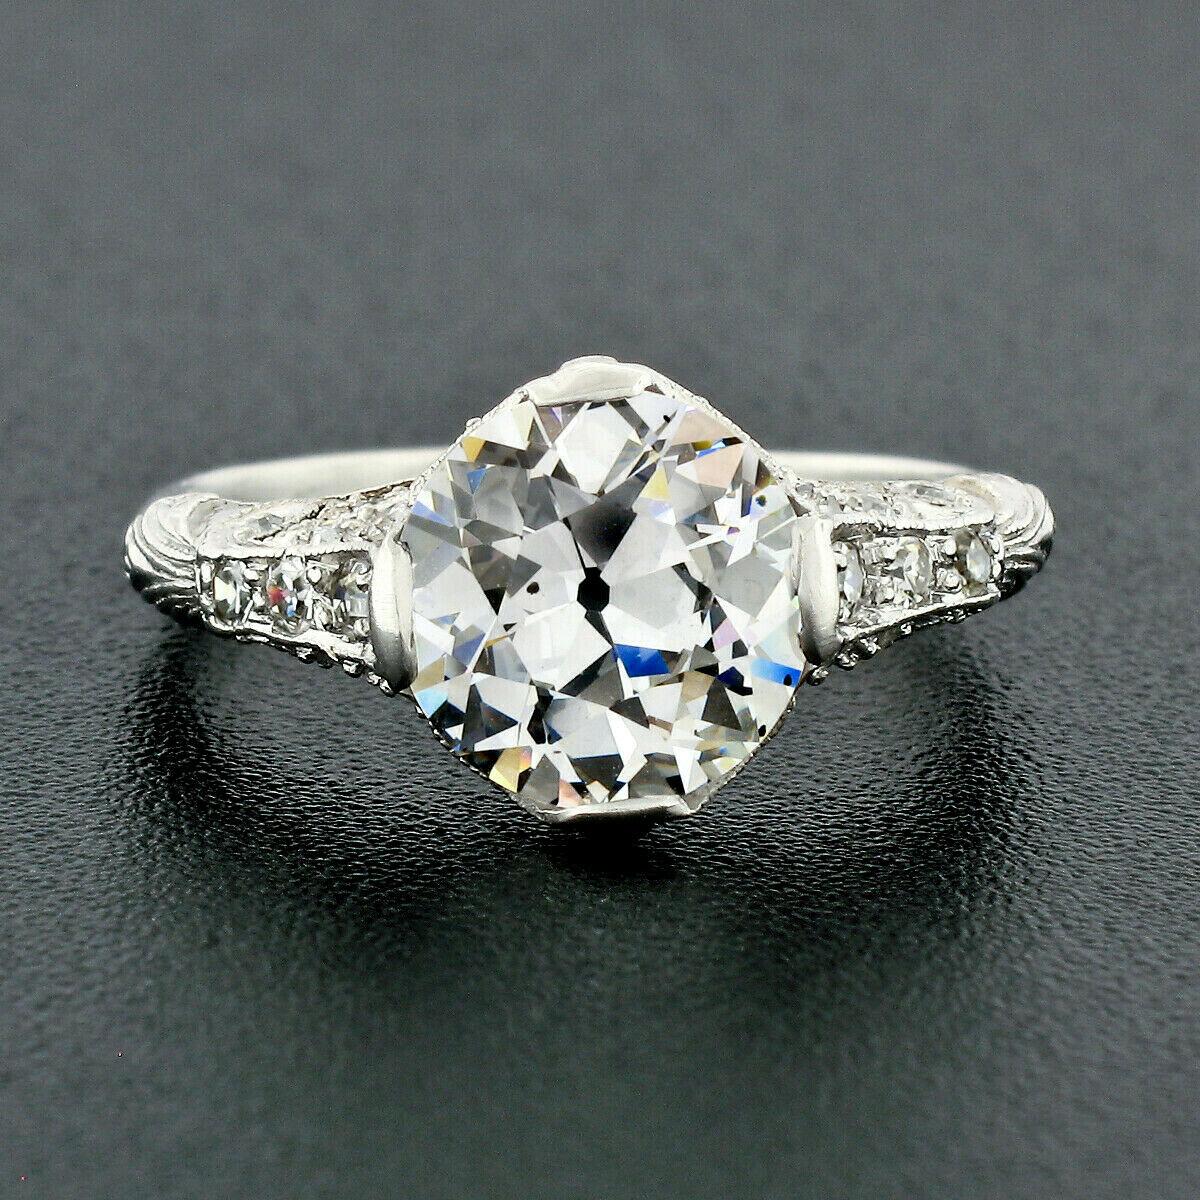 This breathtaking antique diamond engagement ring was crafted from solid platinum during the Edwardian period and features a gorgeous, old European cut diamond solitaire at its center. The diamond is GIA certified, it is 2.03 carats in weight and is